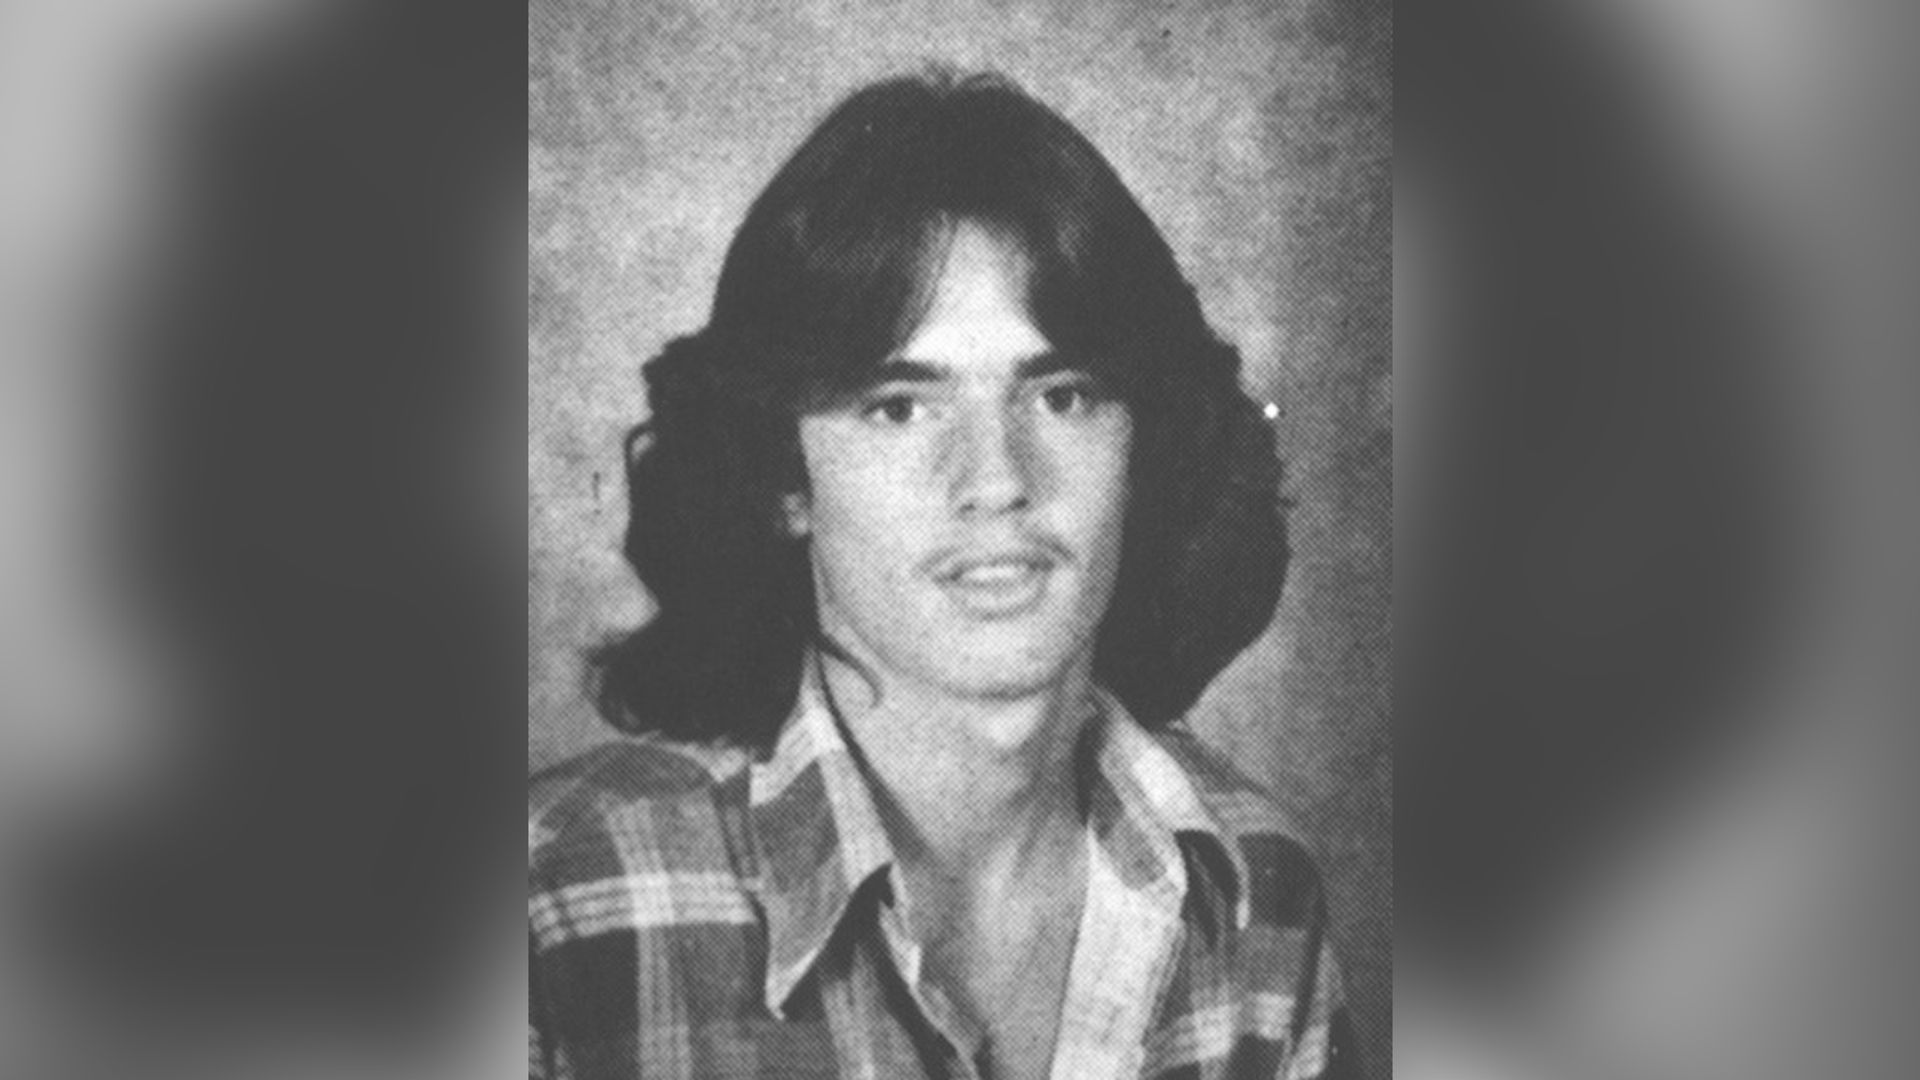 Tommy Lee in his youth